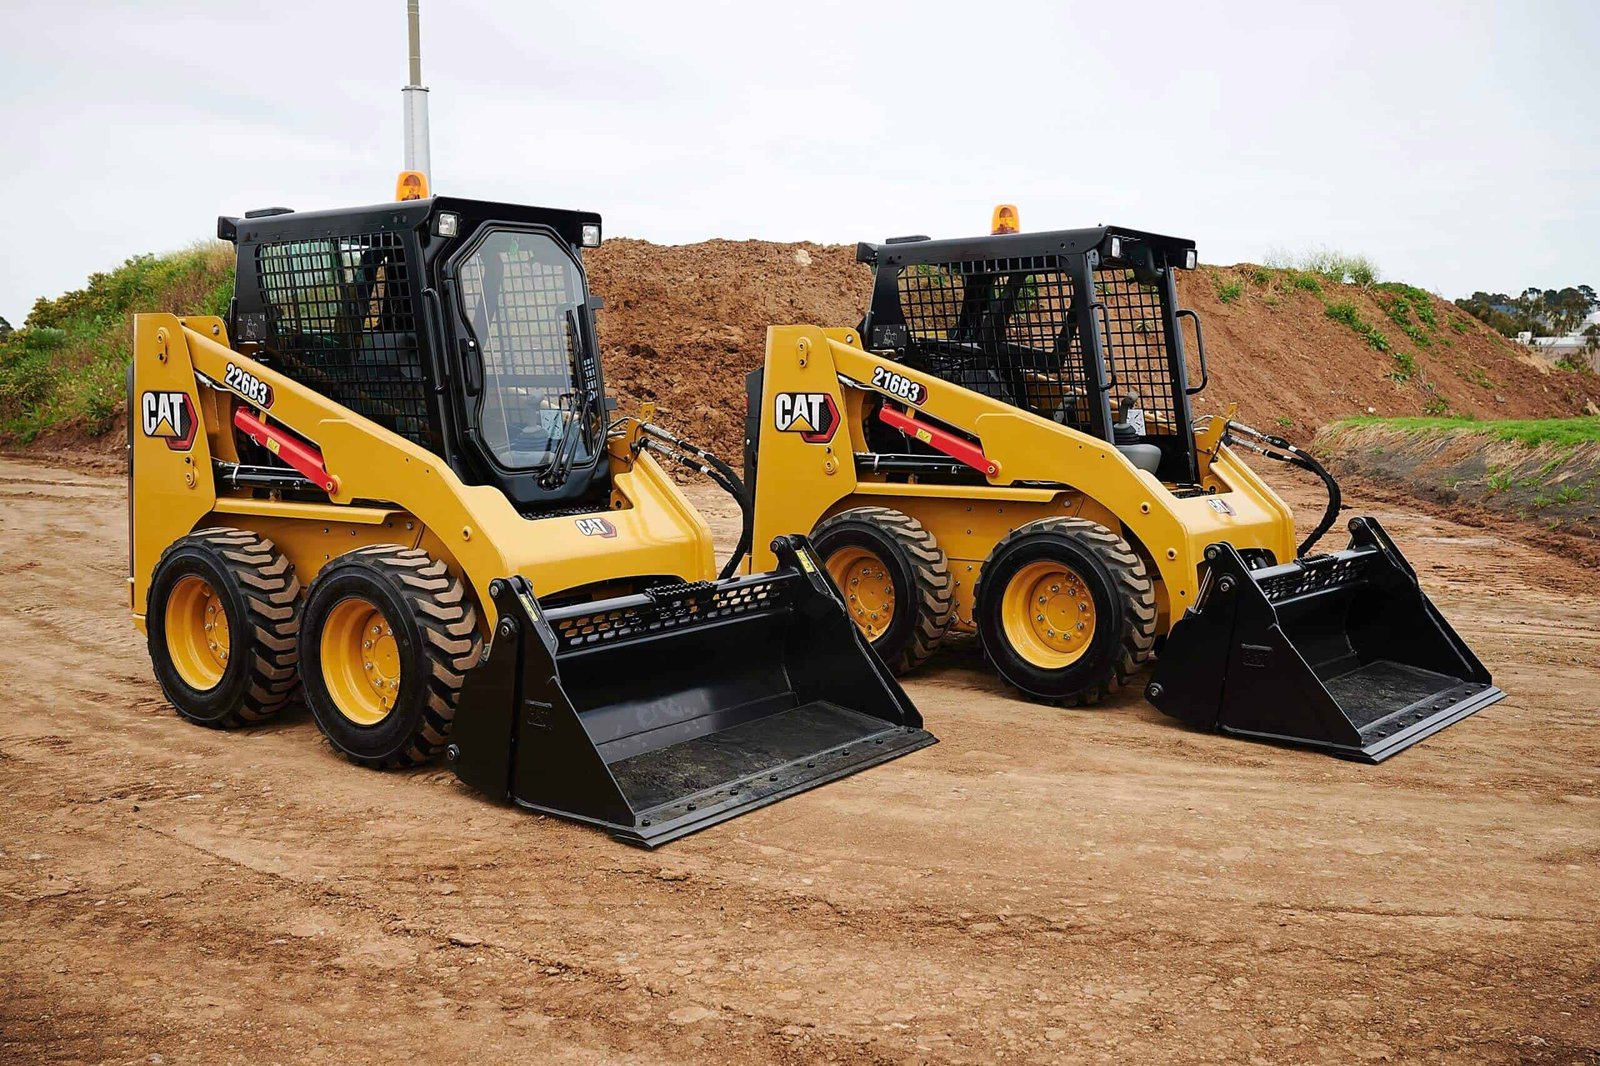 Photograph is showing two skid steer loaders working on site